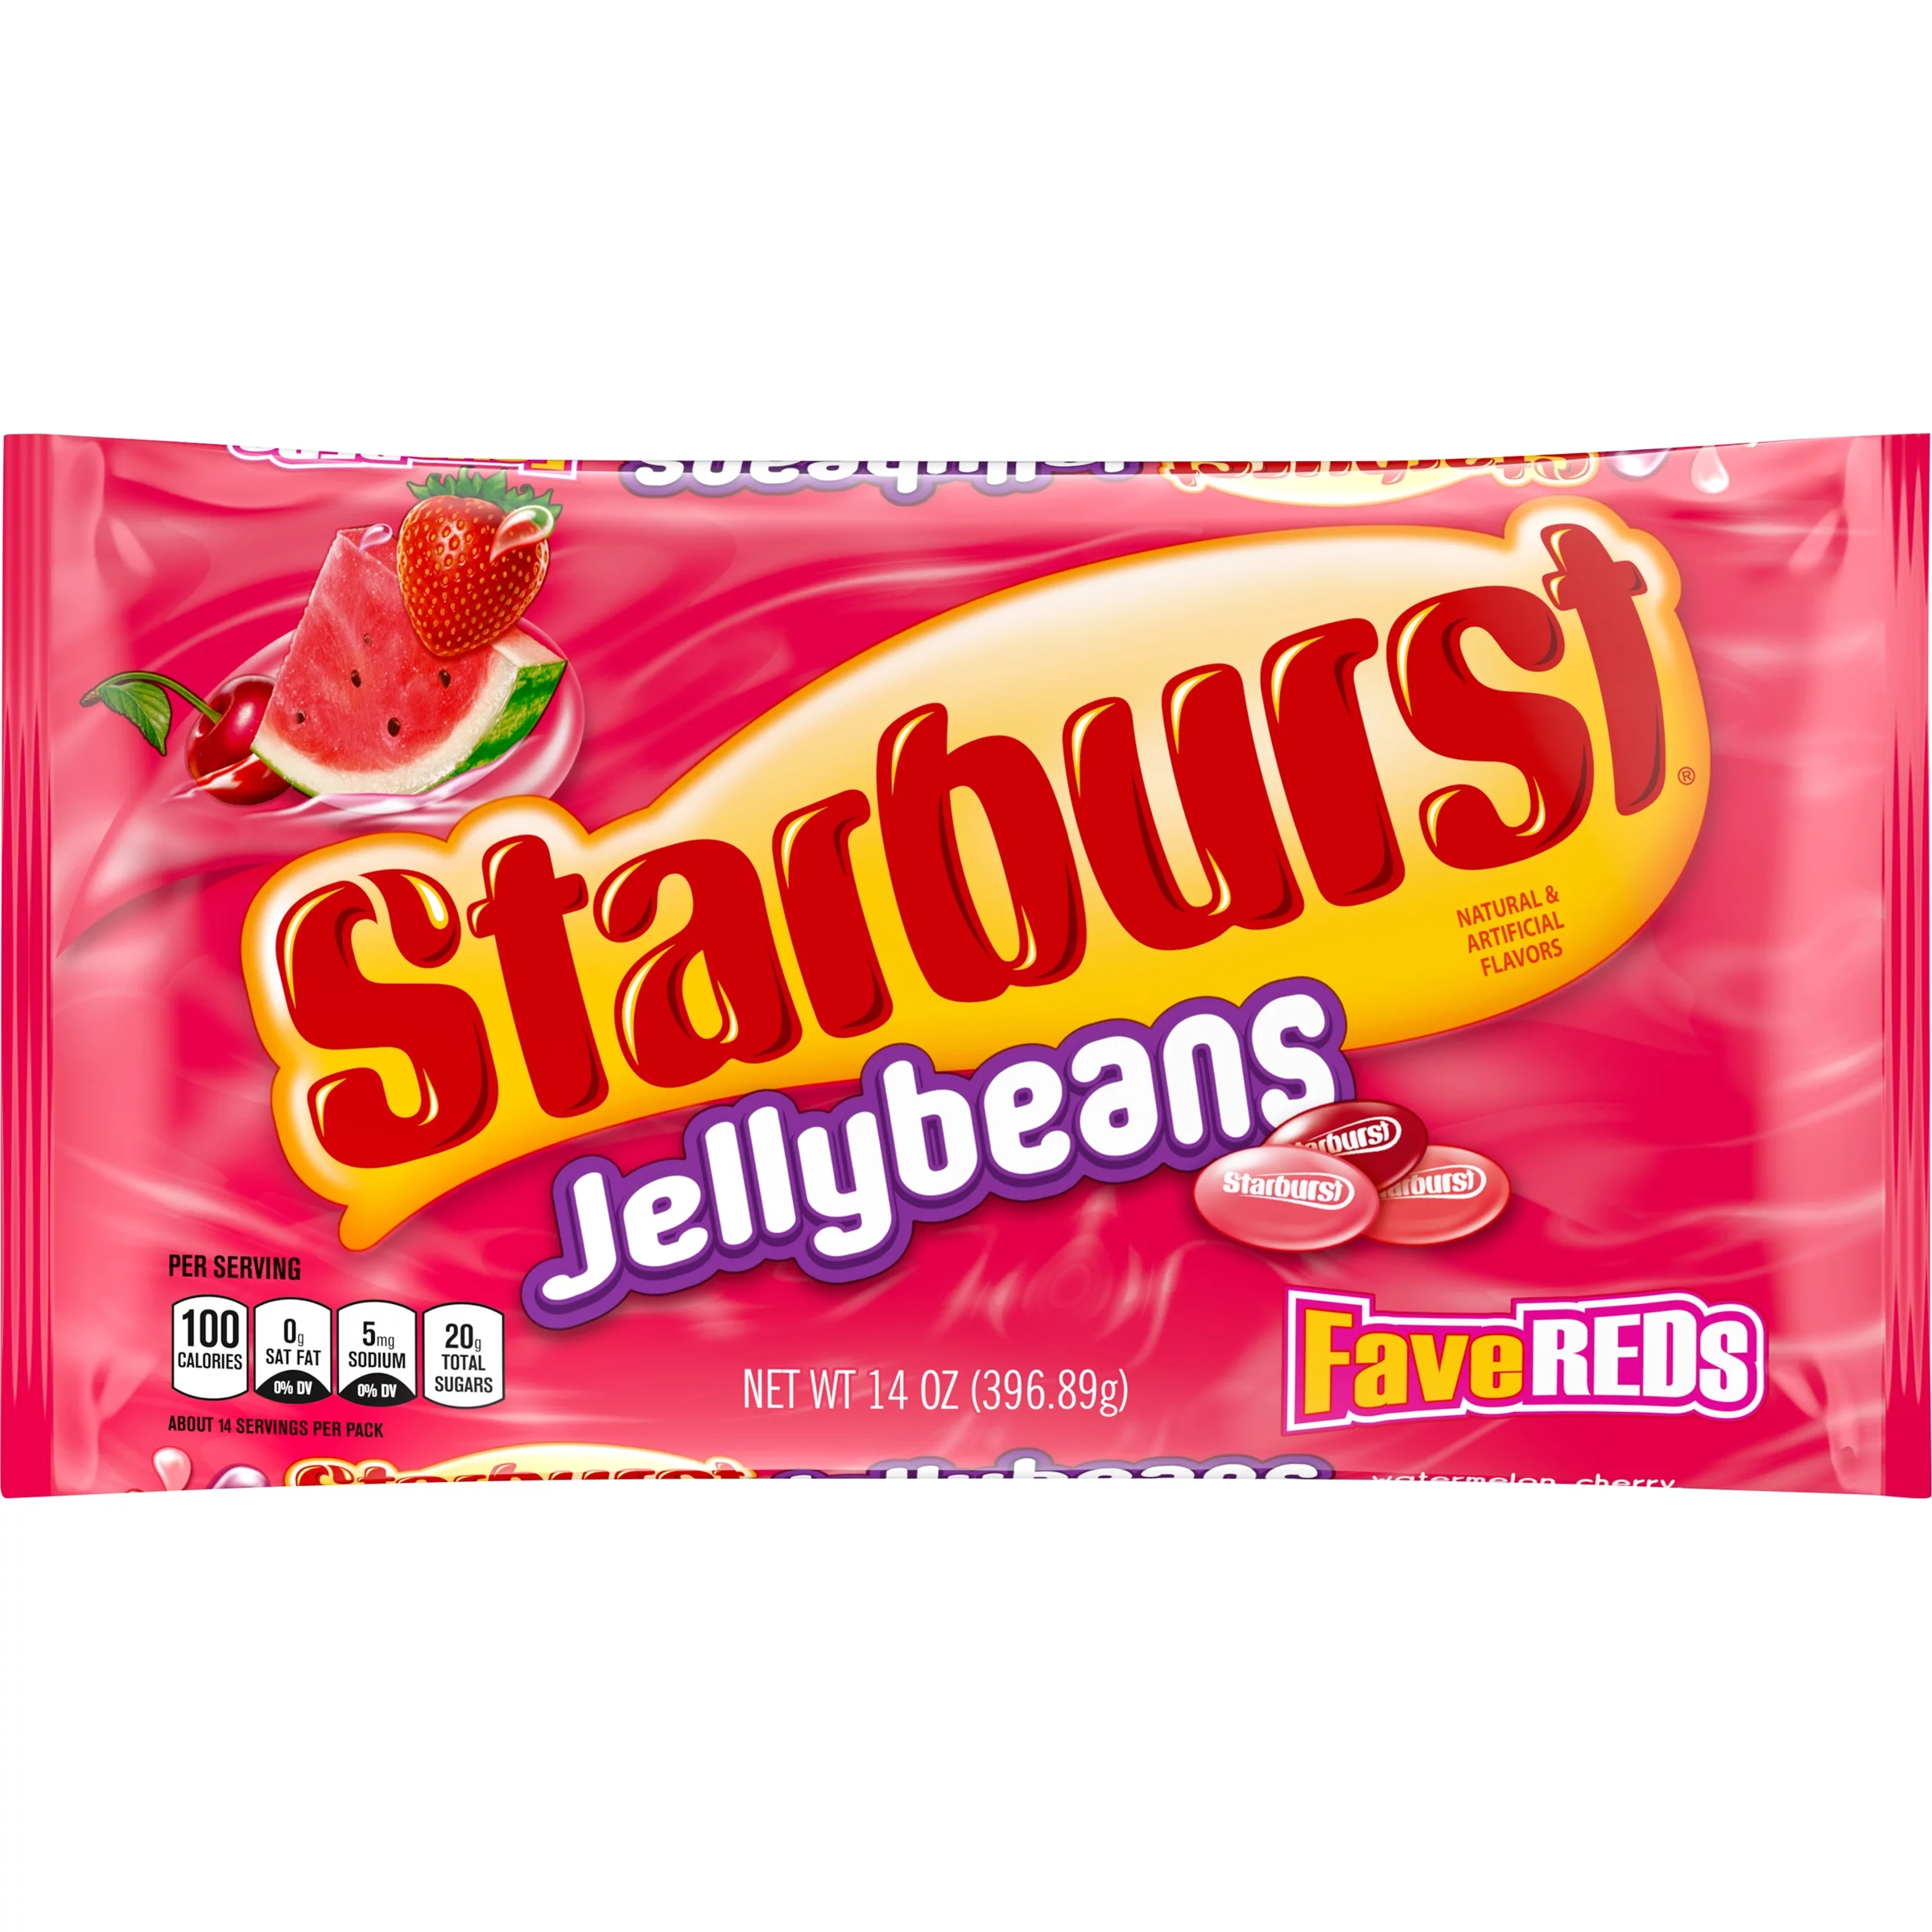 Starburst FaveREDs Jelly Beans Easter Candy Gifts - 14 oz